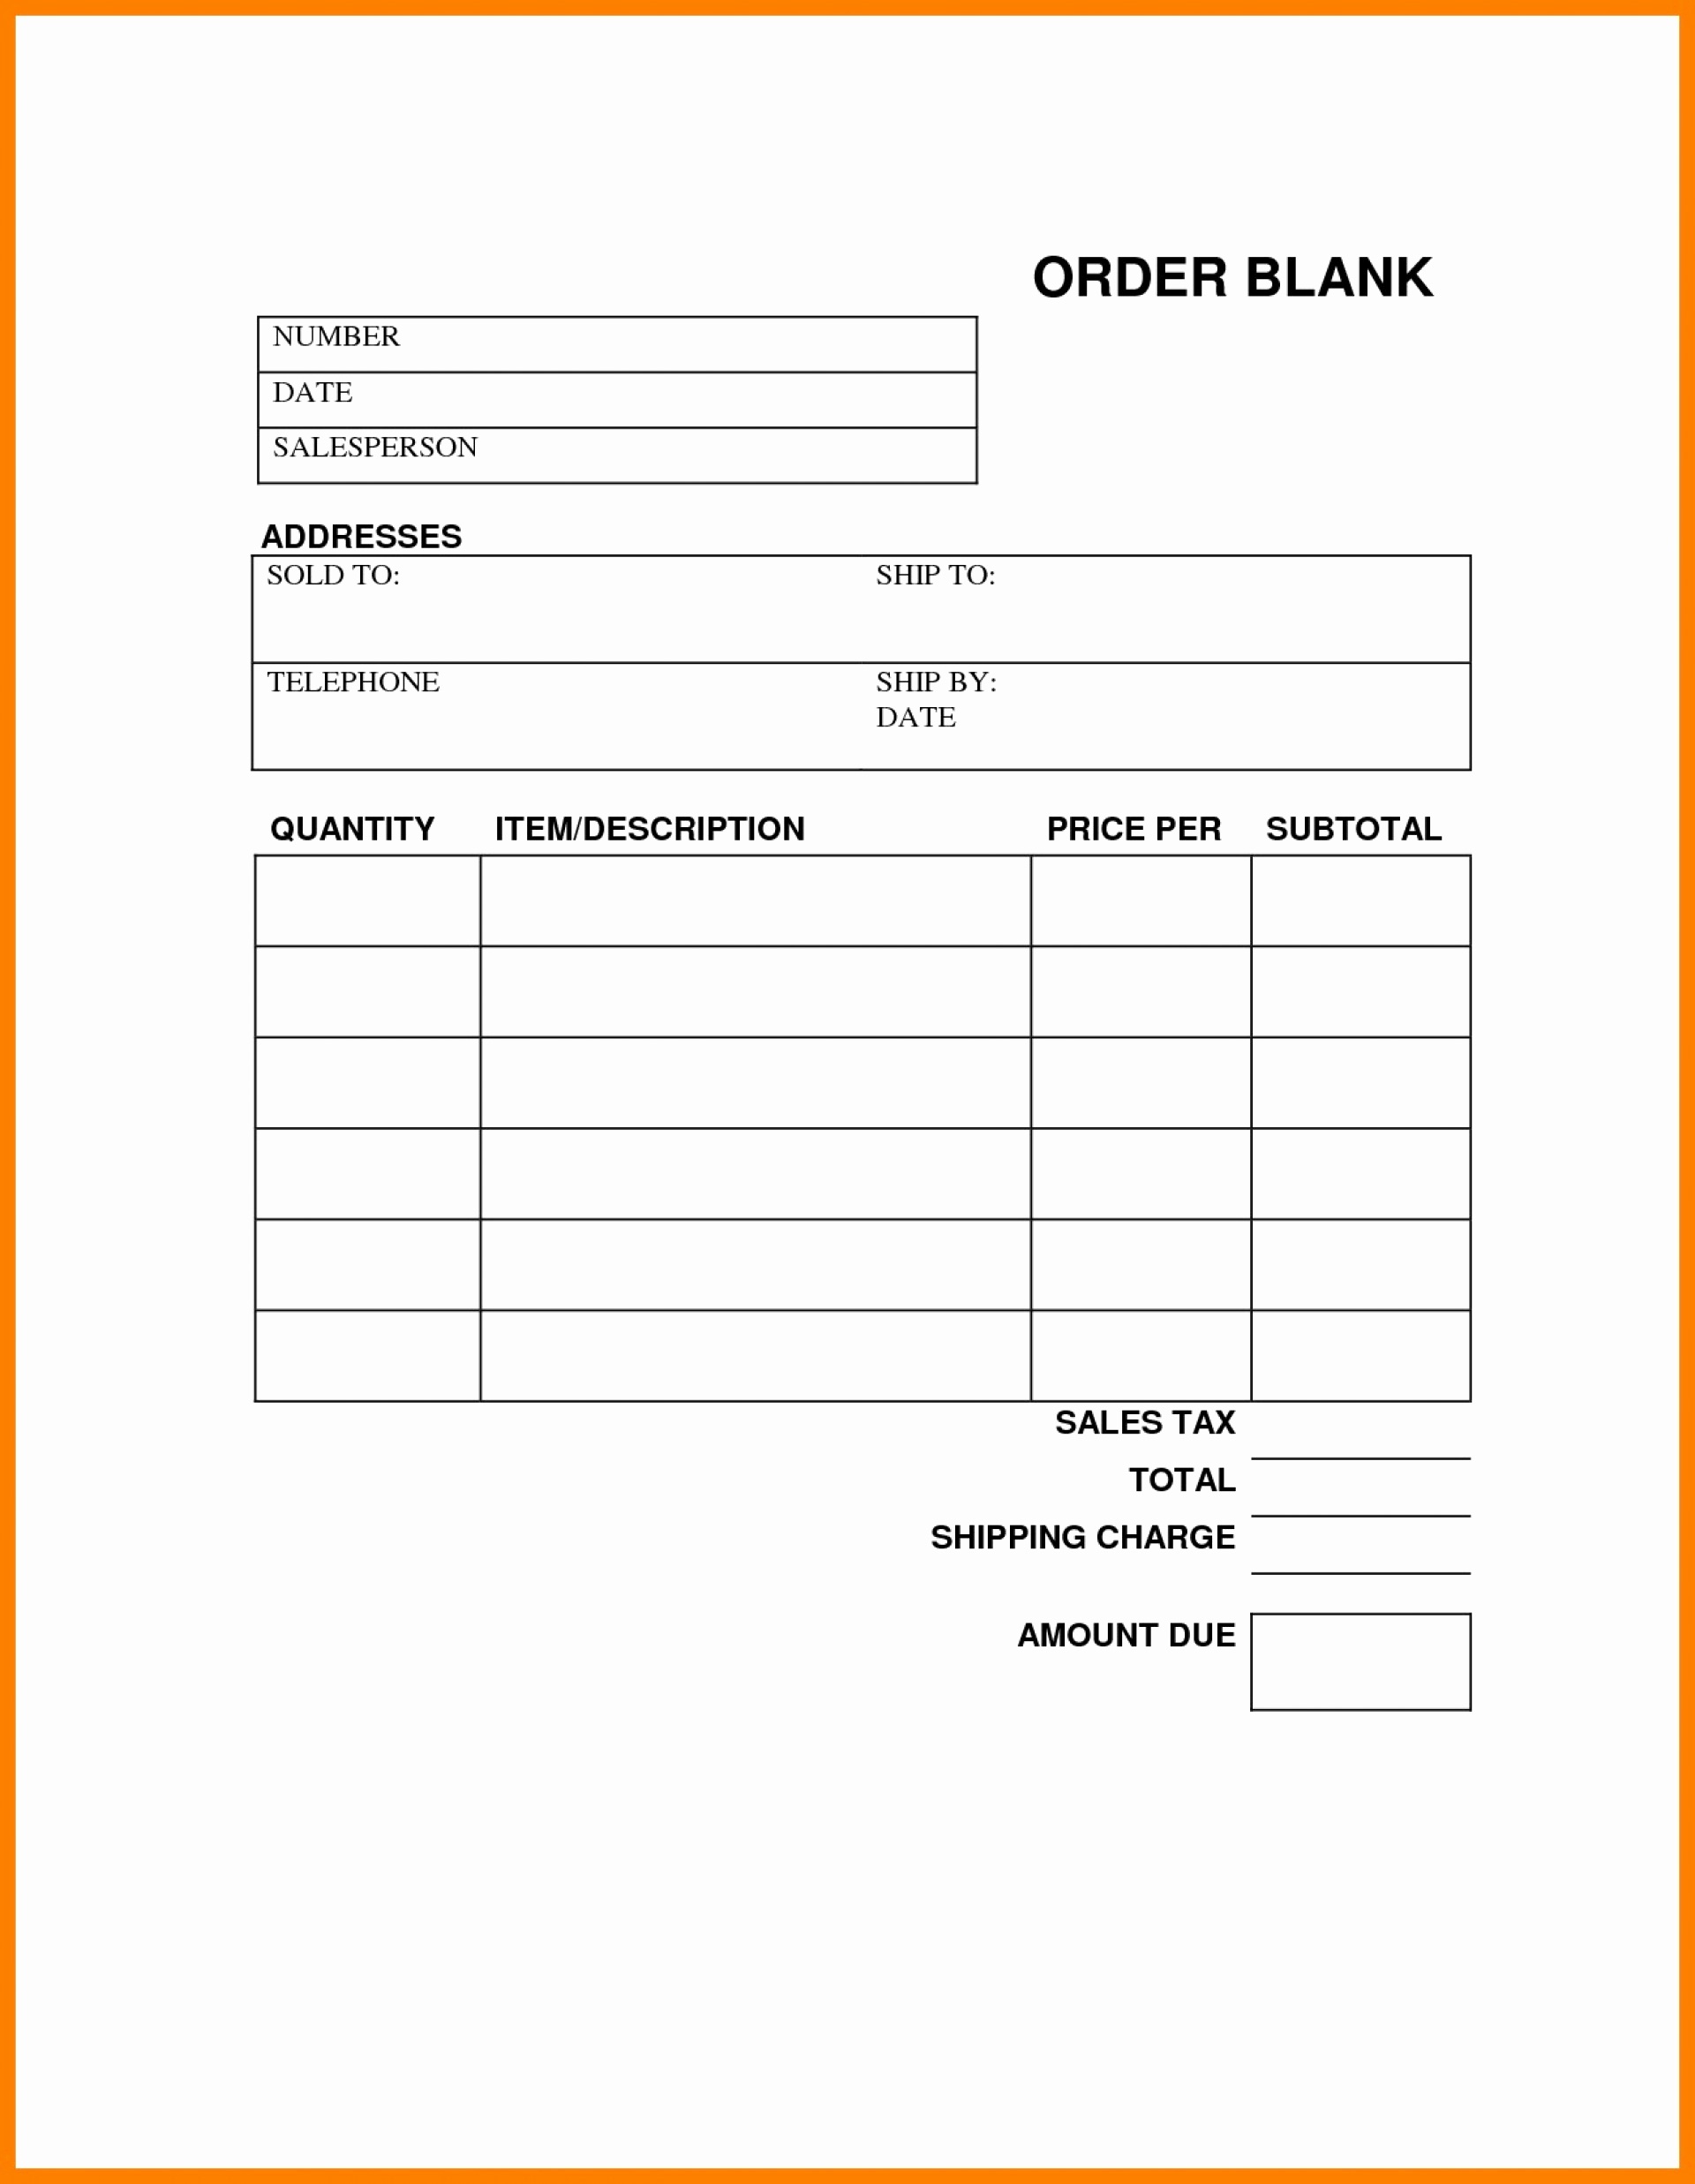 012 Template Ideas Work Order Free Daily Project Closeoutt Awesome - Free Printable Work Order Template